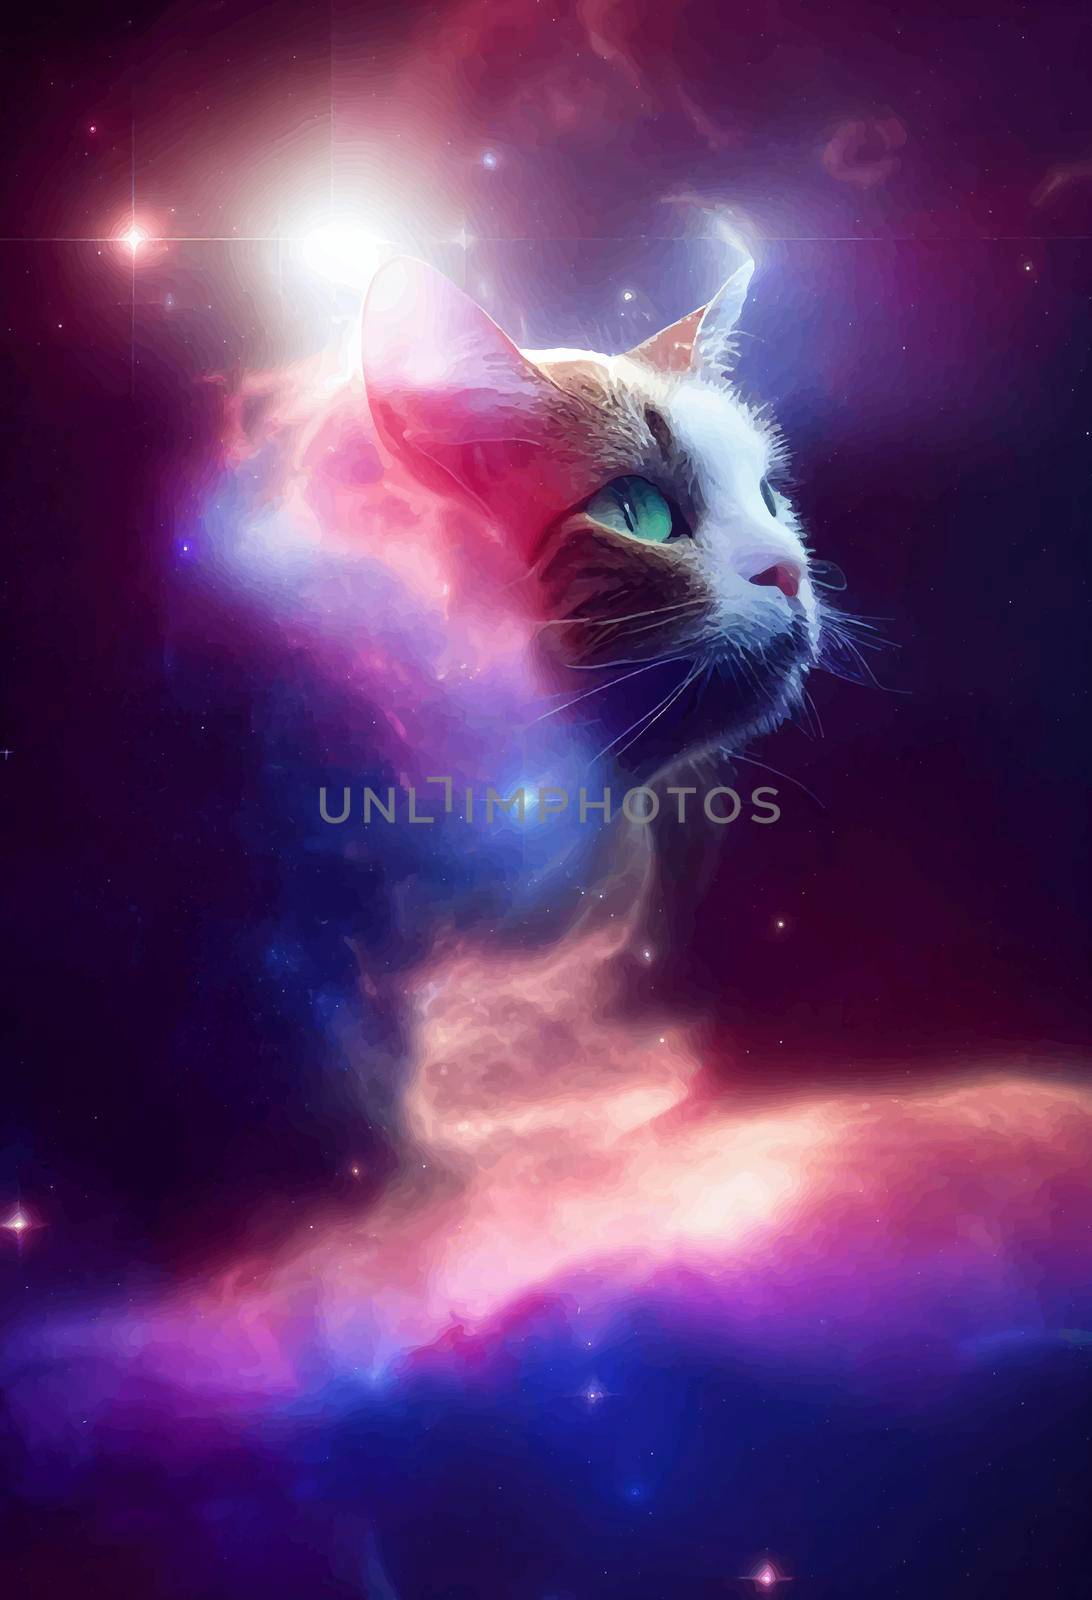 Cat astronaut in space, nebula and galaxies in space.